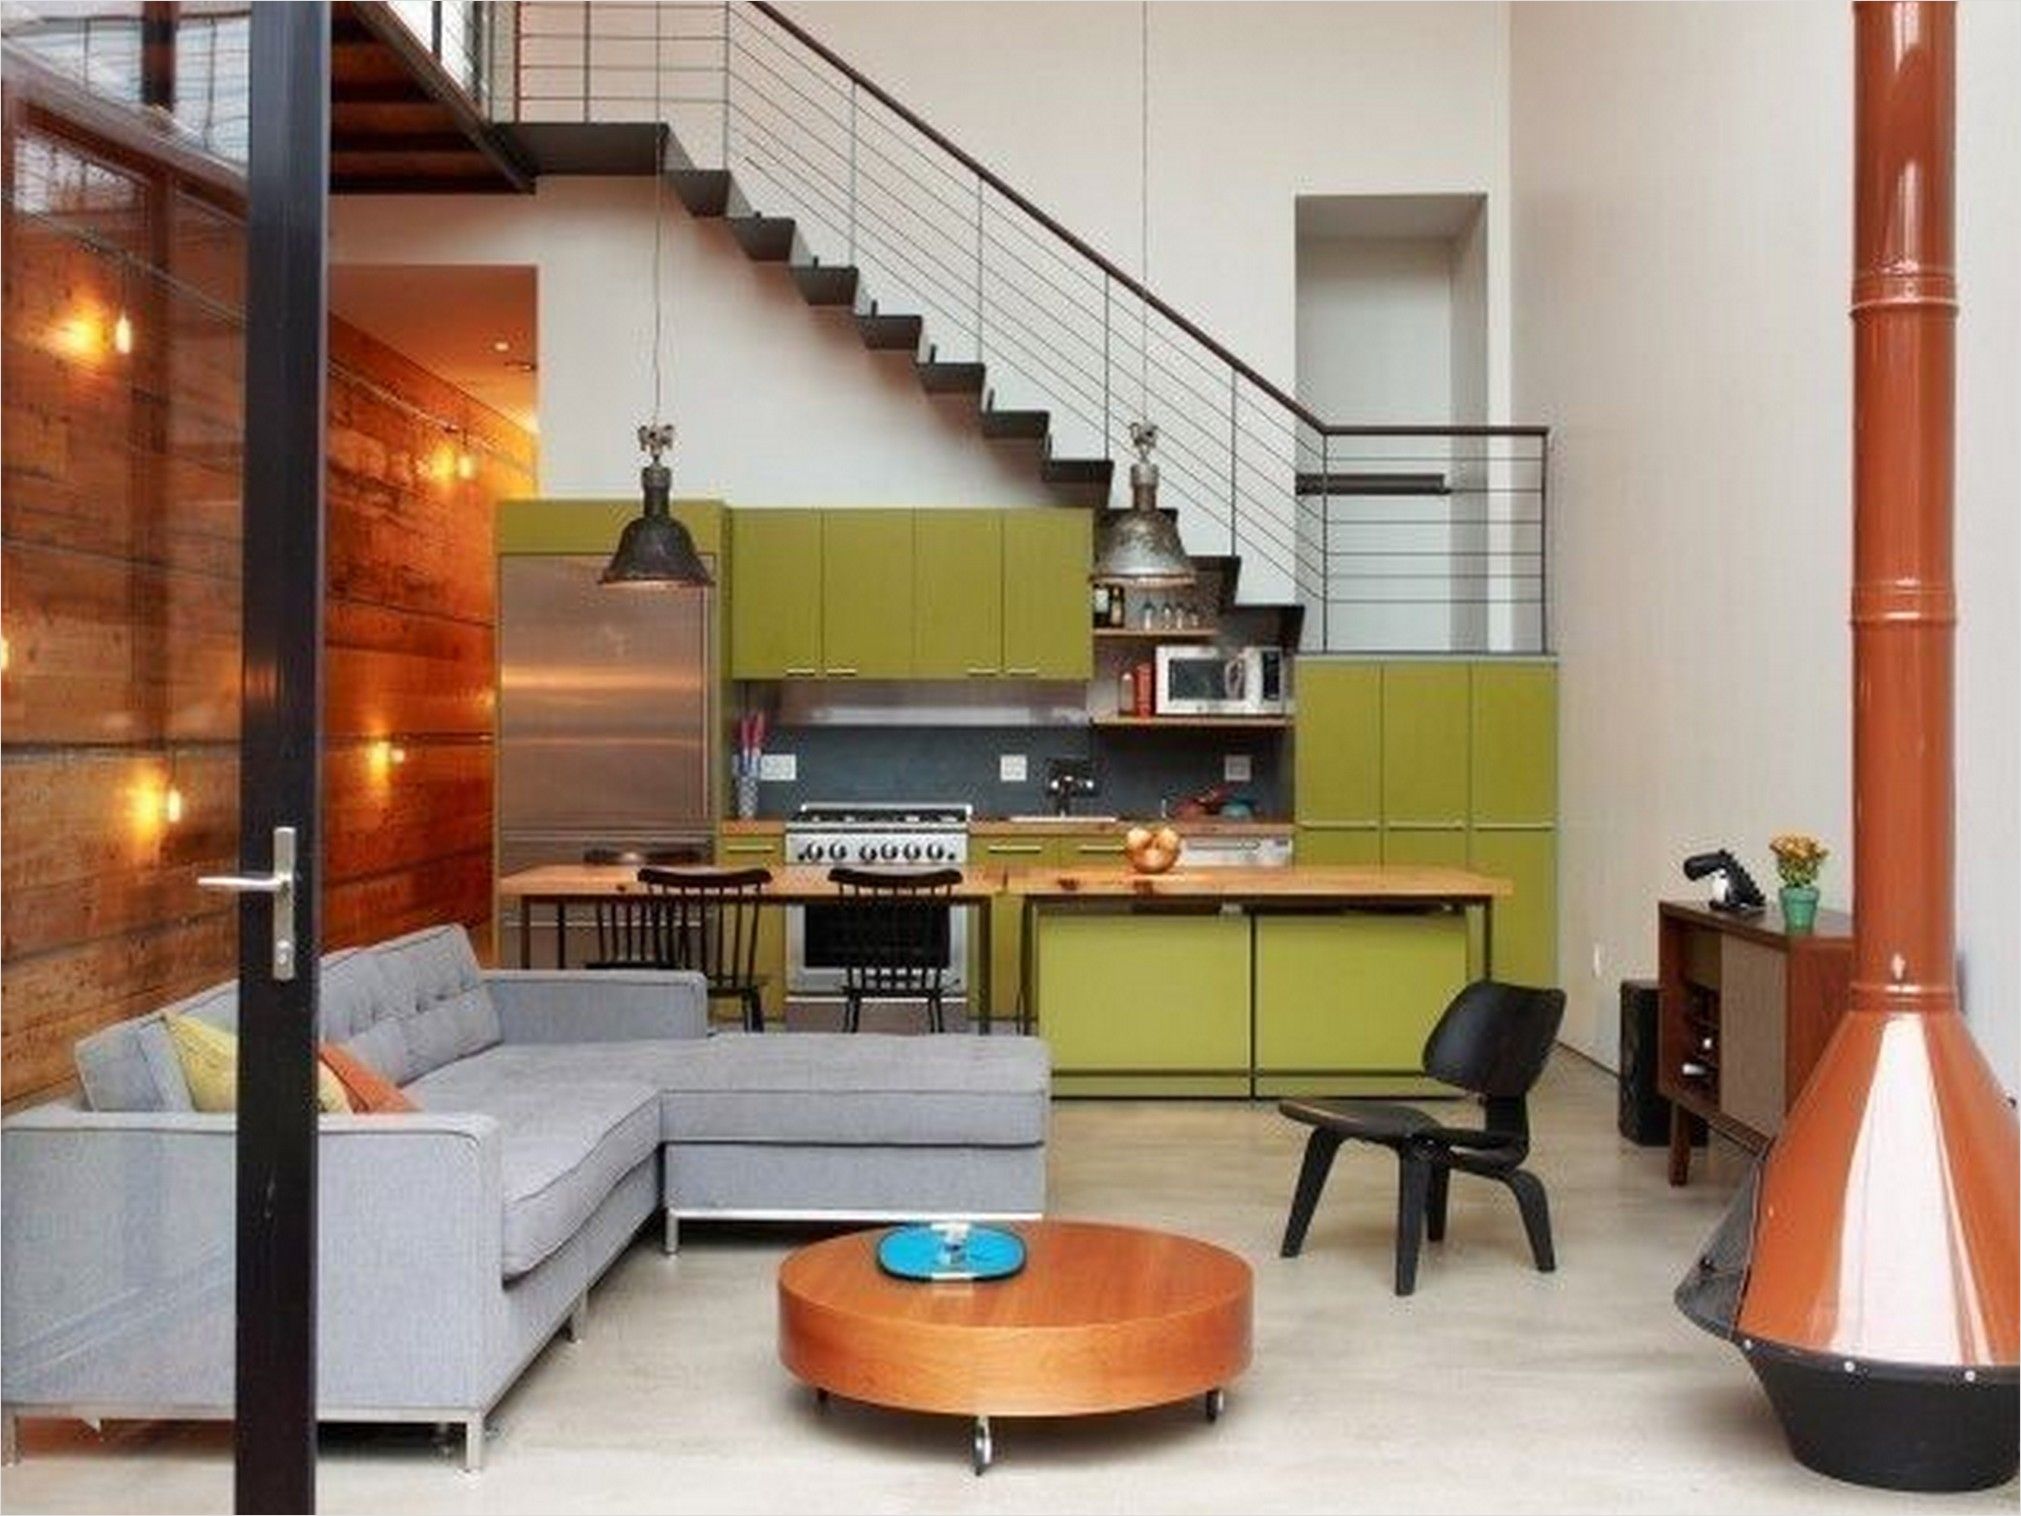 Compact Living: Small Space Interior Design Solutions